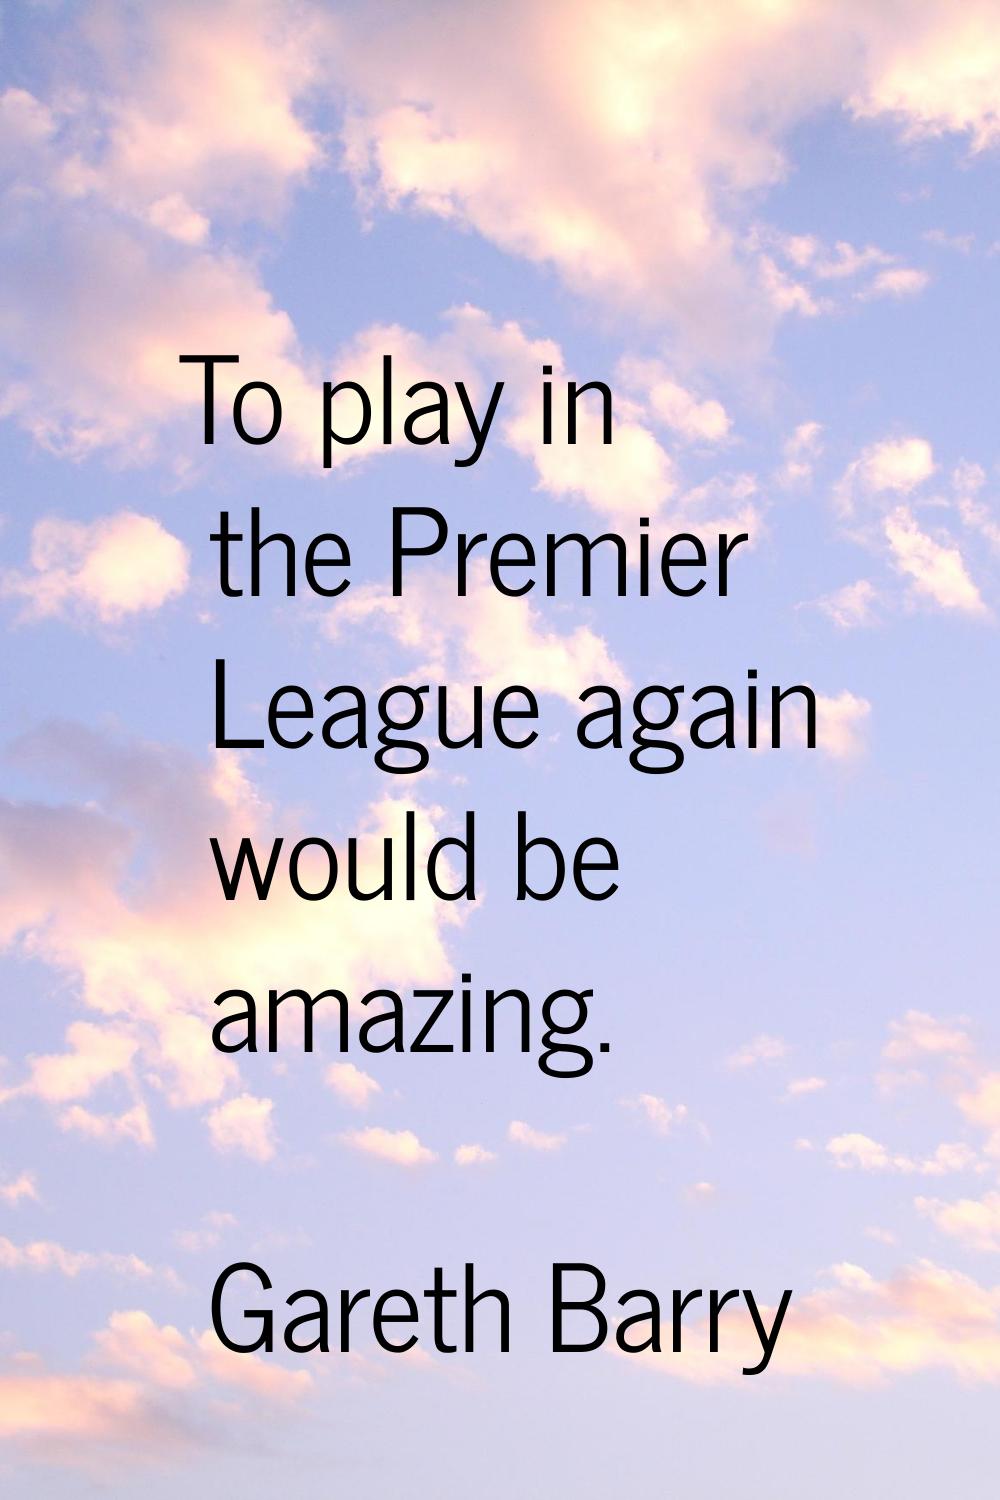 To play in the Premier League again would be amazing.